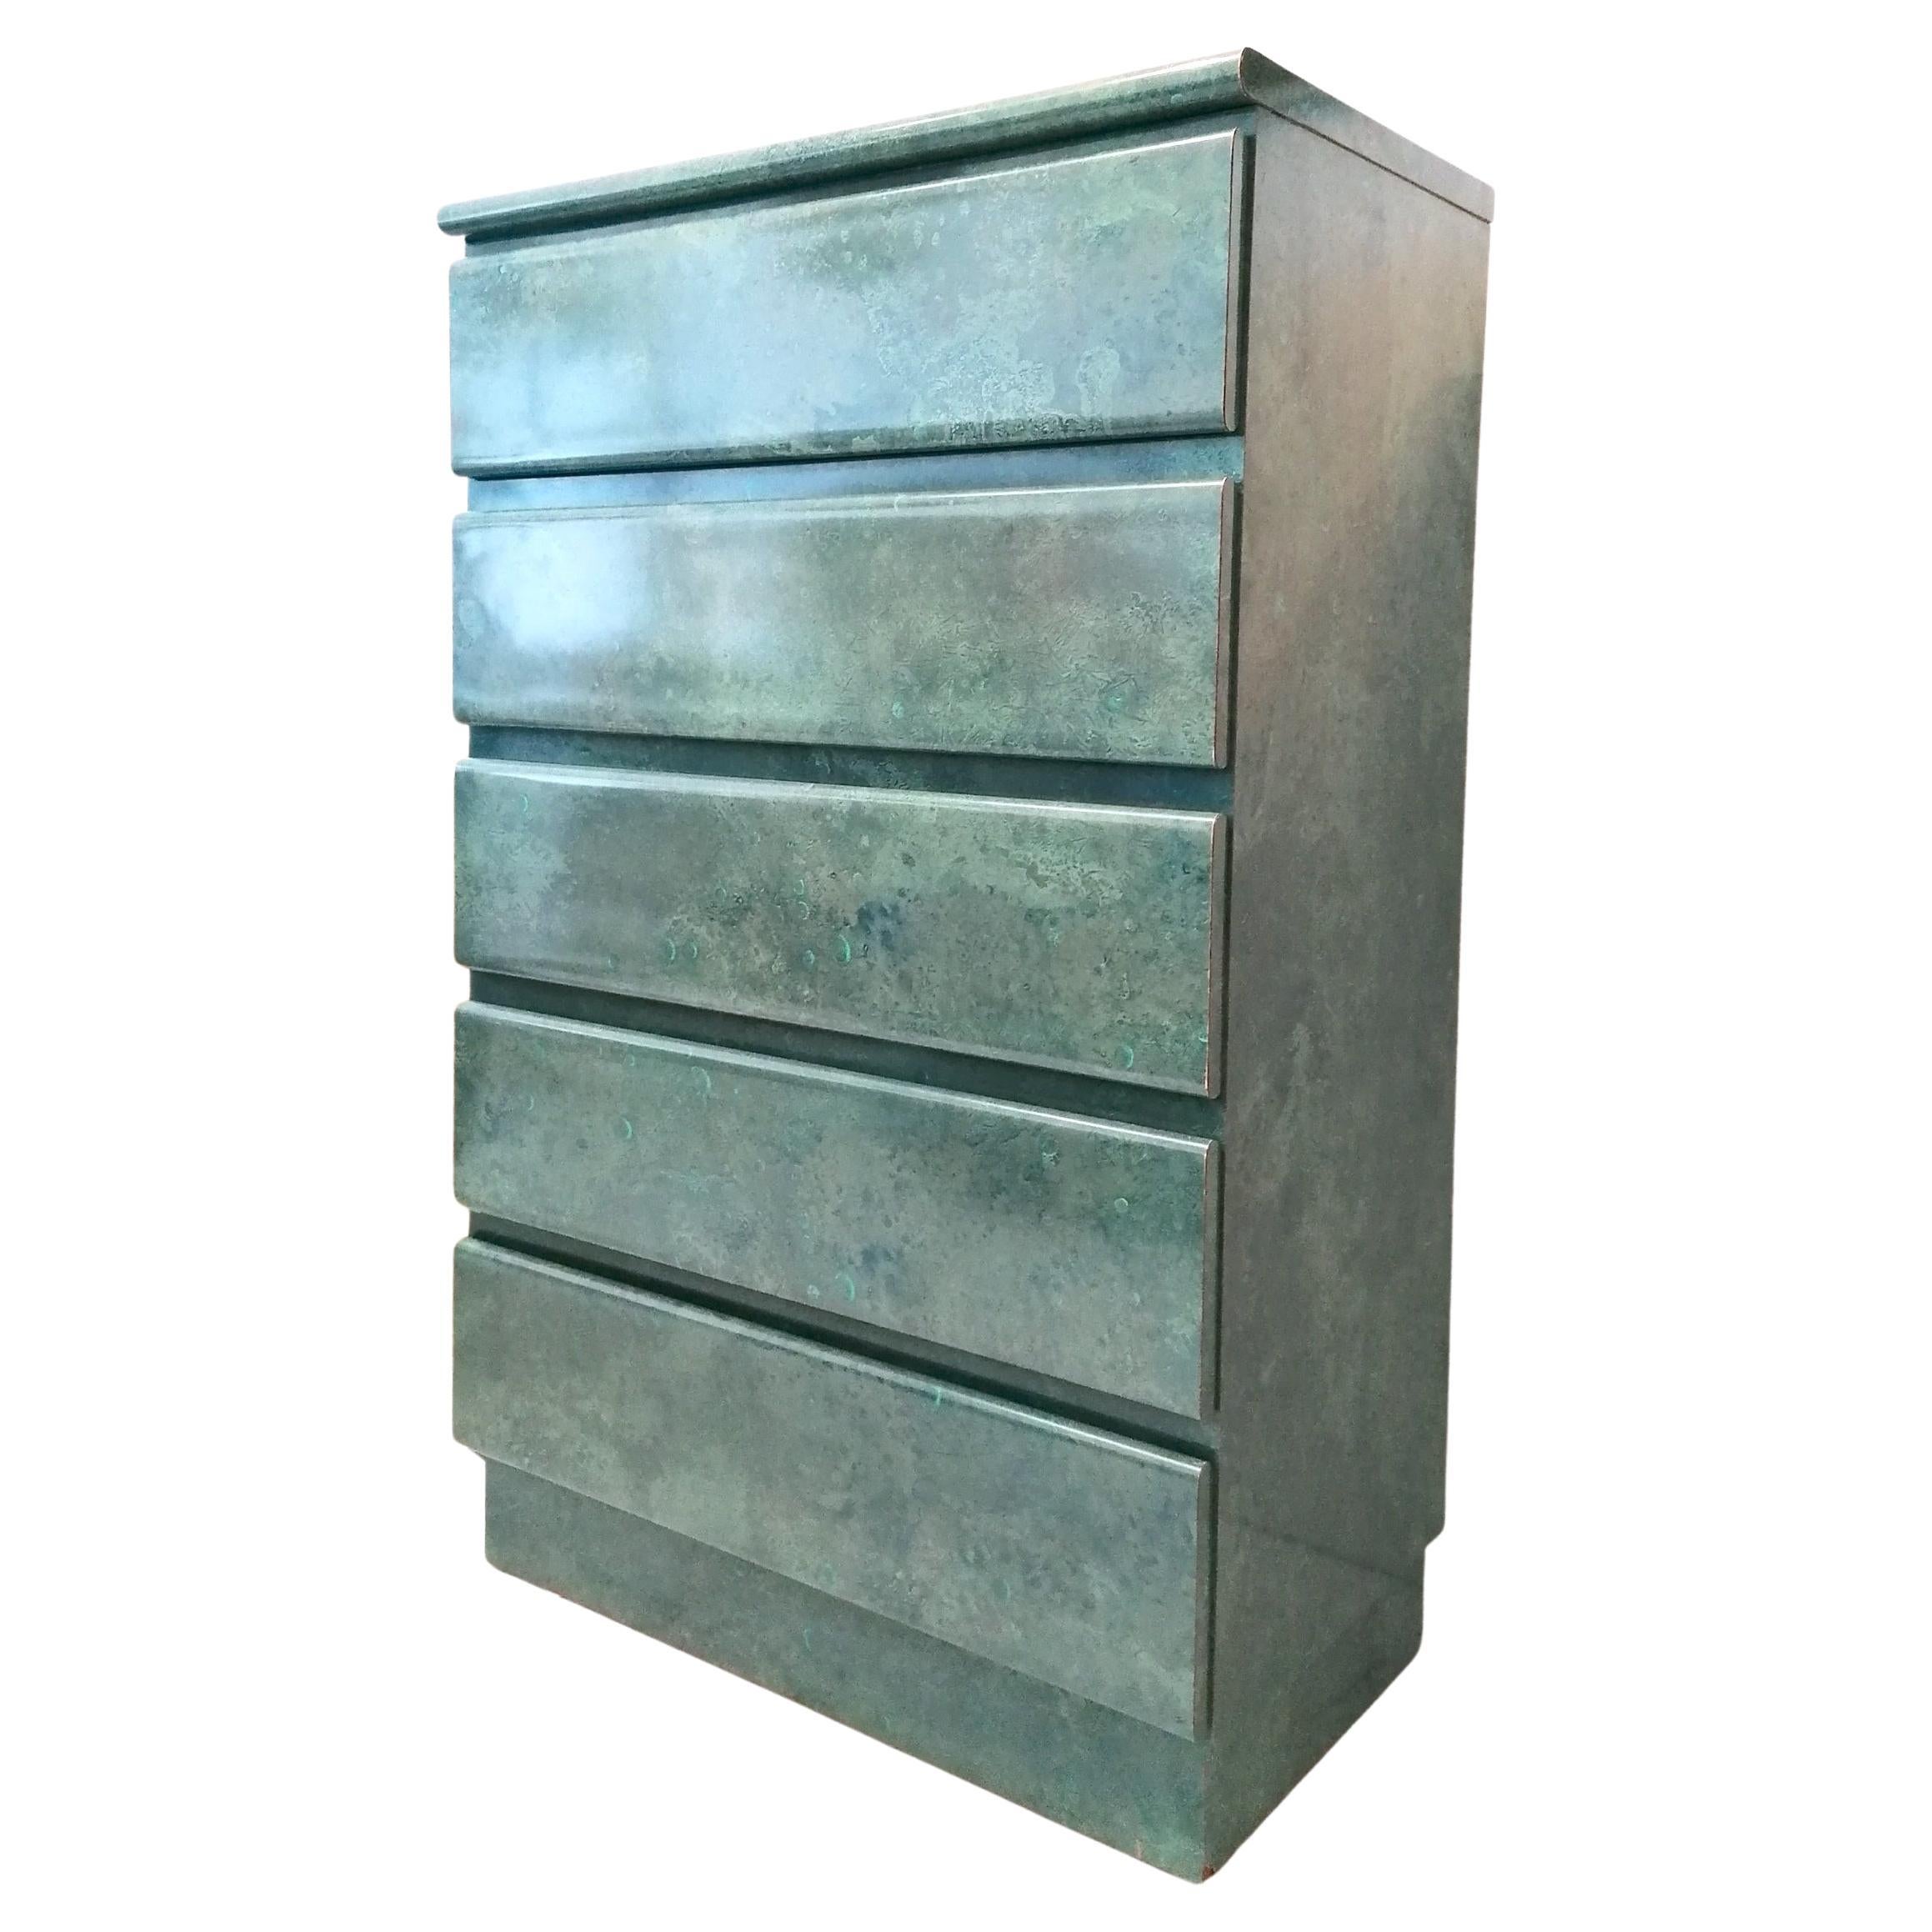 Vintage Aqua / Jade Lacquer Laminate Tall Drawer Cabinet, USA, 1980s For Sale